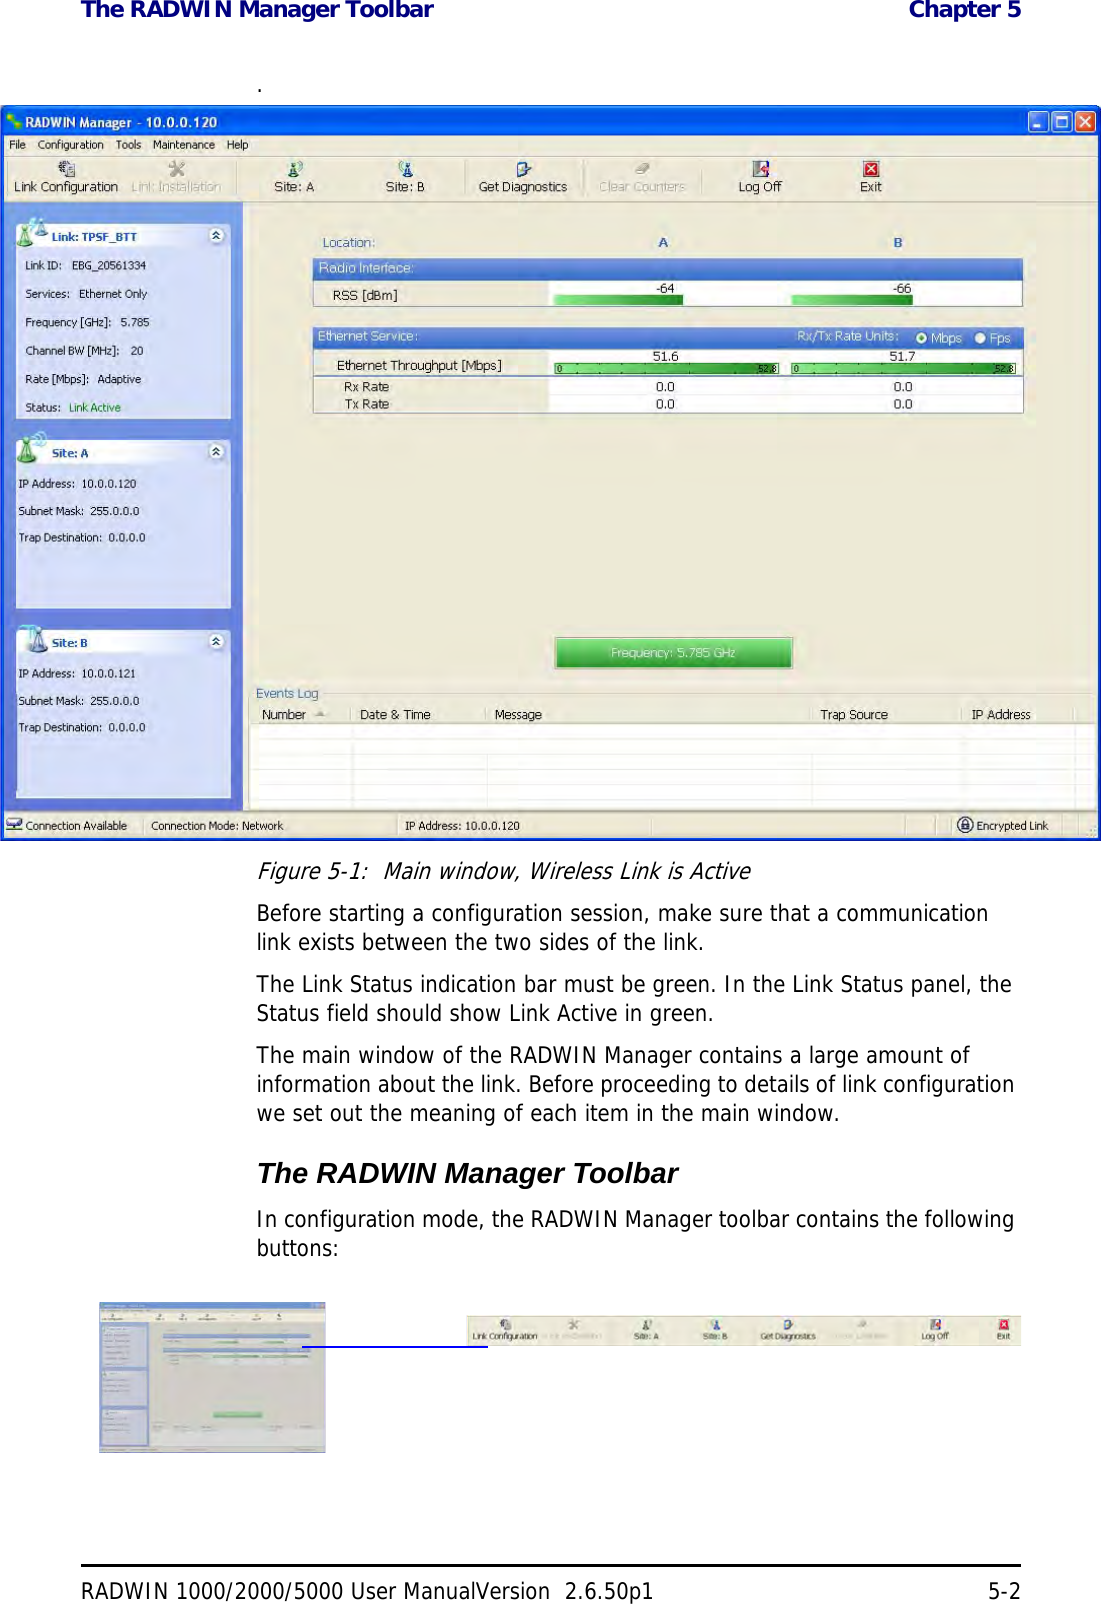 The RADWIN Manager Toolbar  Chapter 5RADWIN 1000/2000/5000 User ManualVersion  2.6.50p1 5-2.Figure 5-1:  Main window, Wireless Link is ActiveBefore starting a configuration session, make sure that a communication link exists between the two sides of the link.The Link Status indication bar must be green. In the Link Status panel, the Status field should show Link Active in green.The main window of the RADWIN Manager contains a large amount of information about the link. Before proceeding to details of link configuration we set out the meaning of each item in the main window.The RADWIN Manager ToolbarIn configuration mode, the RADWIN Manager toolbar contains the following buttons: